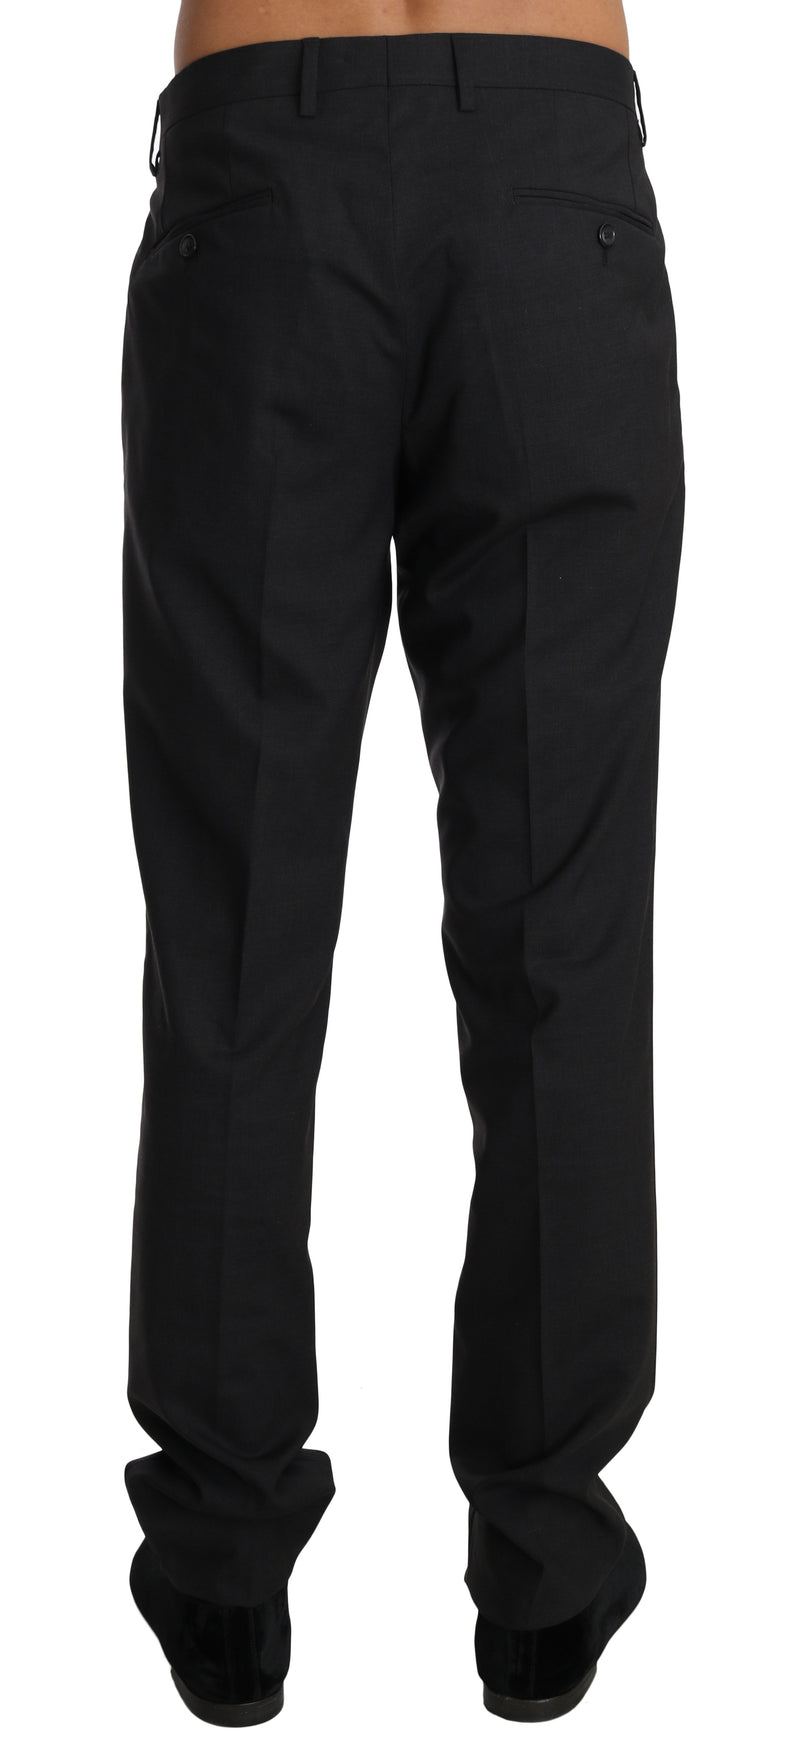 Gray Wool Stretch Formal Trousers Pants